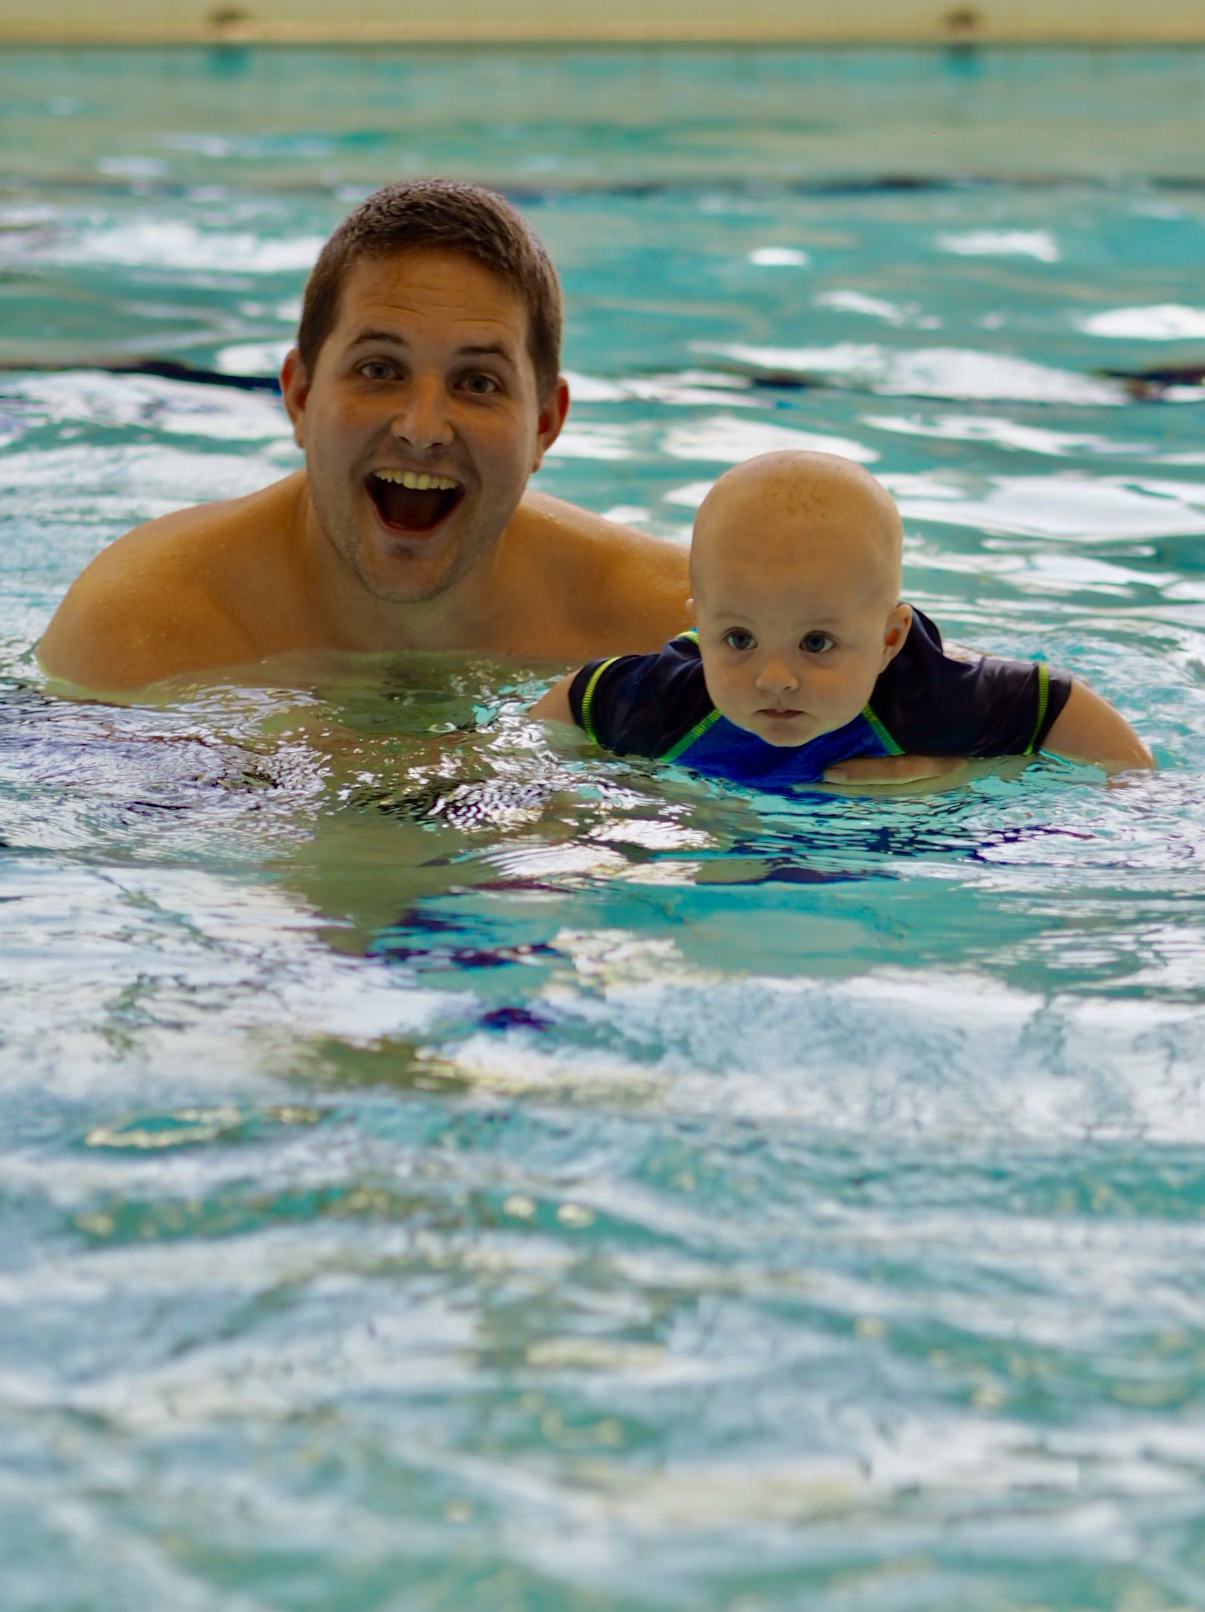 Swimming with babies, swimming lessons, disposable swimming nappies, Huggies, Happy Nappy, vaccinations, top tips, first time mum, first time parents, mum life, parenting, swimming hacks, parenting hacks